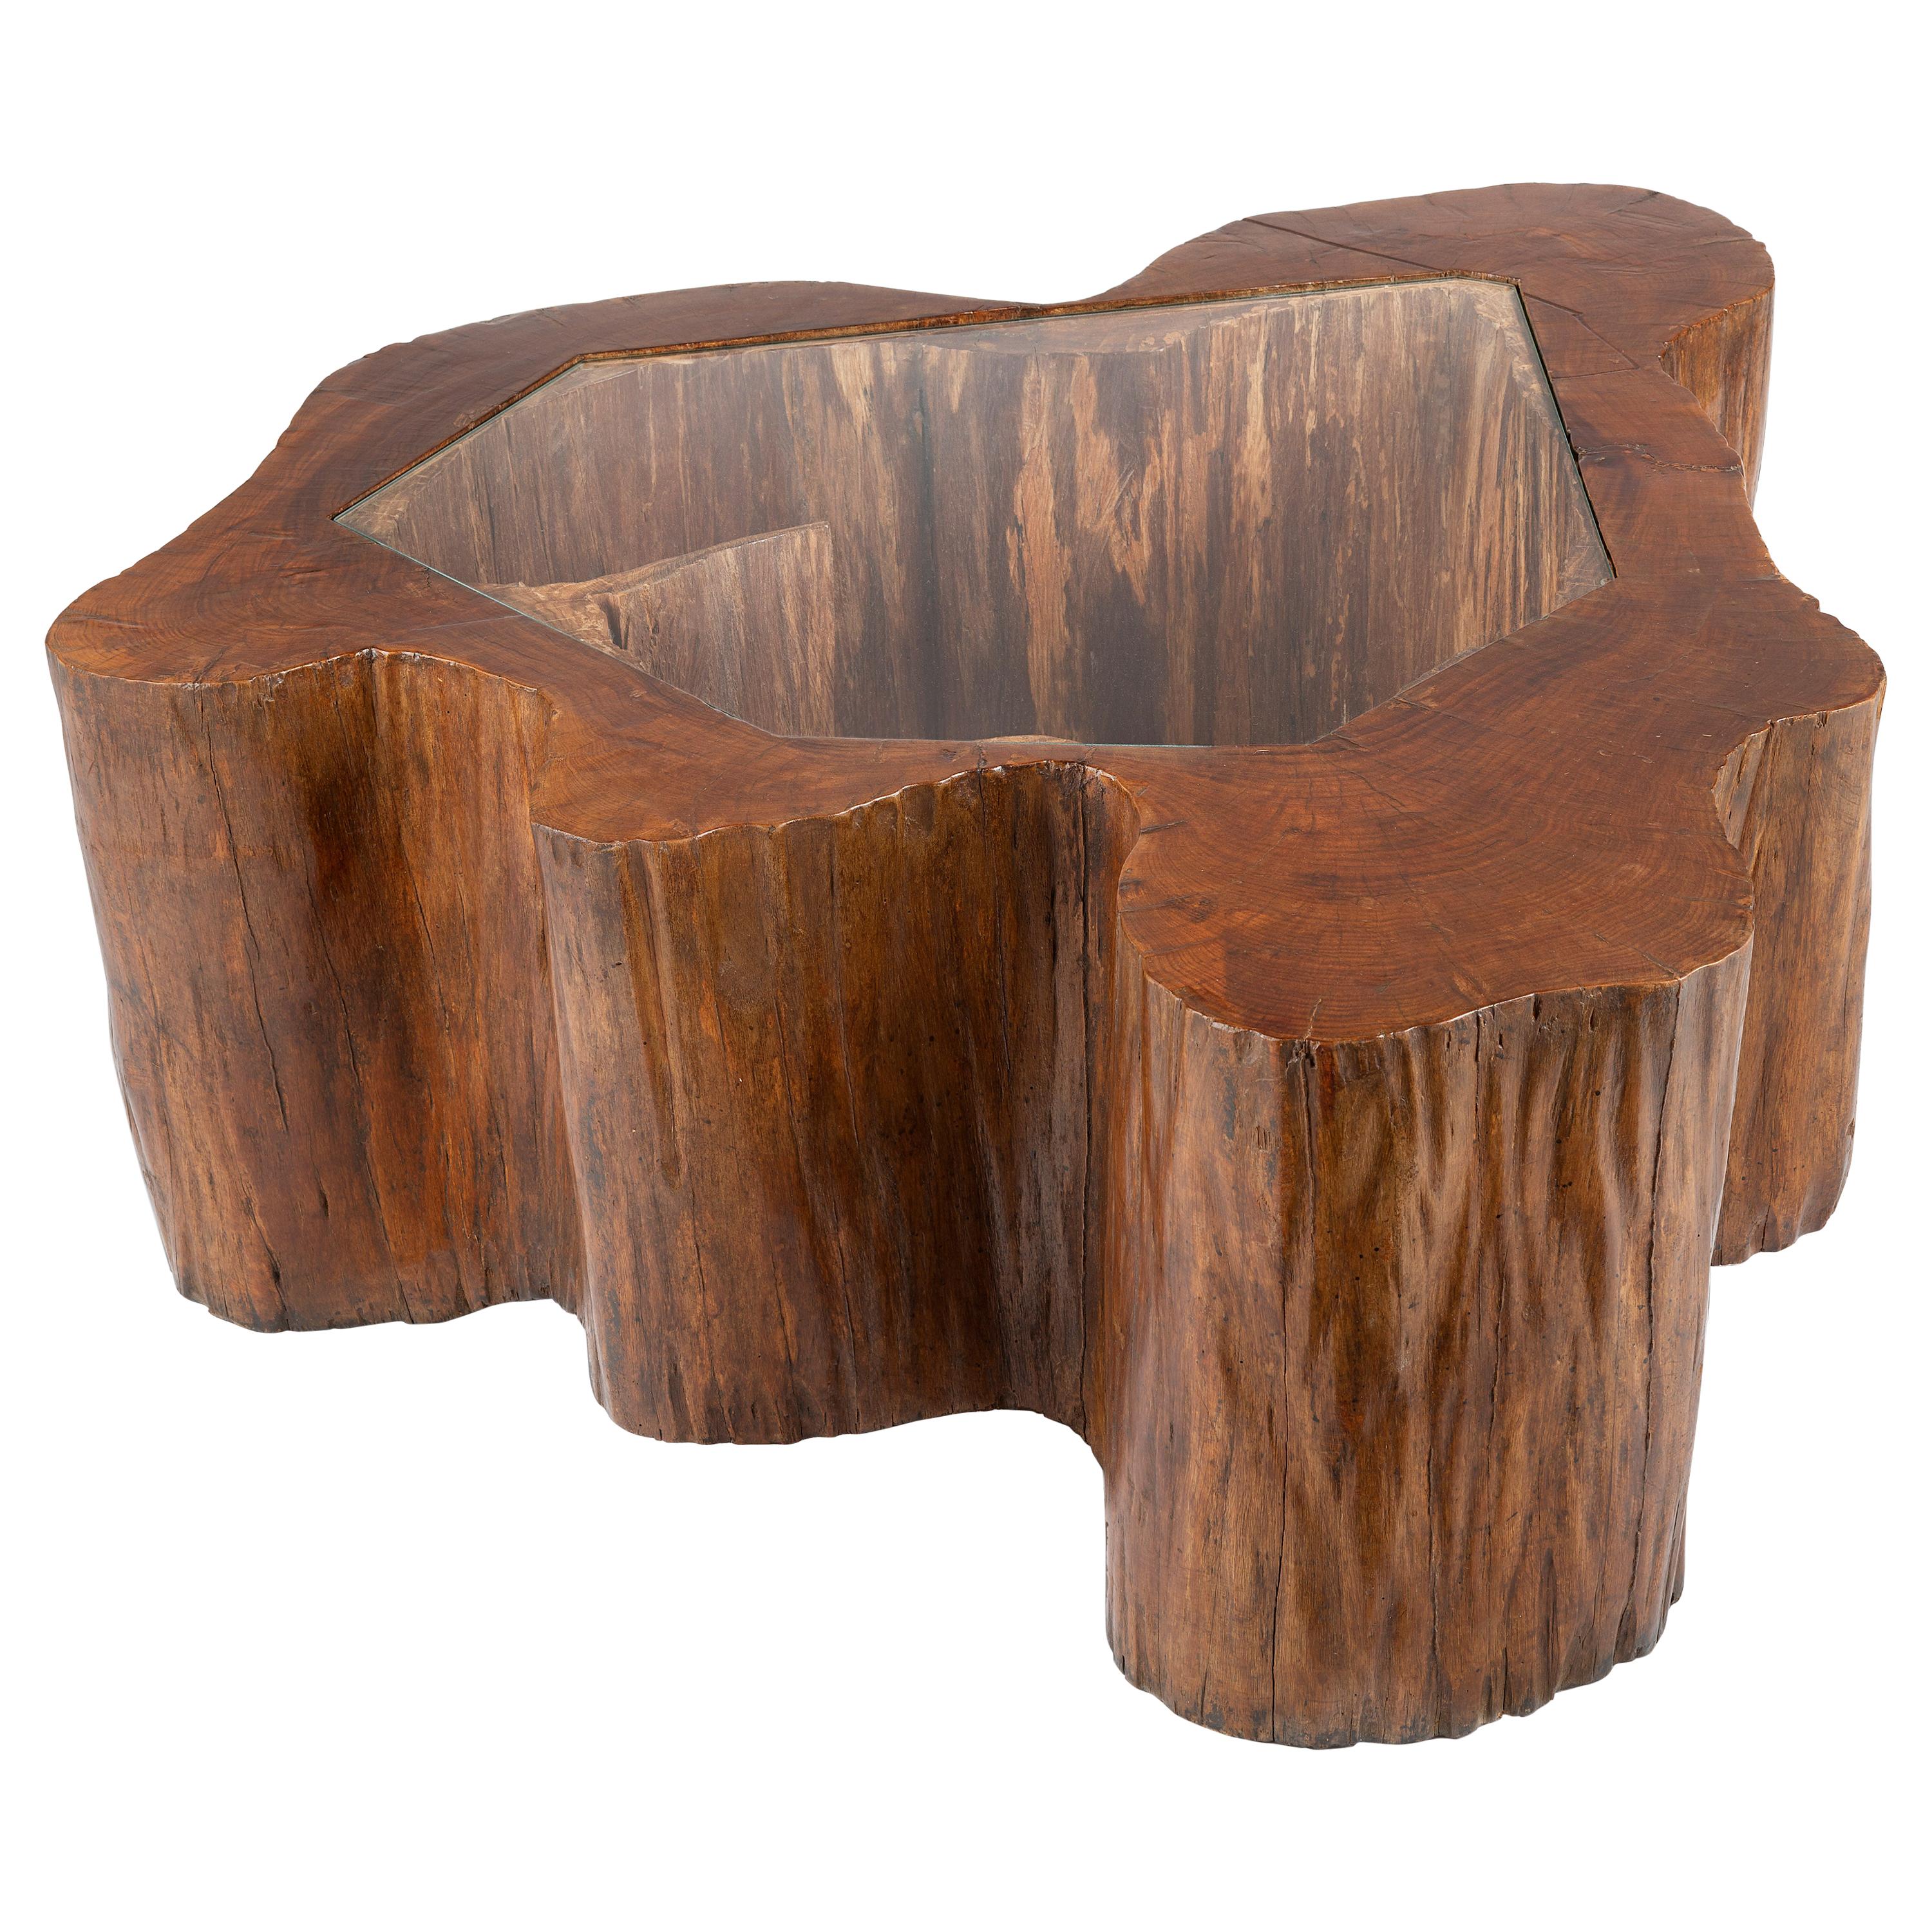 Sculptural Solid Wood and Handcrafted Coffee Table by José Zanine Caldas